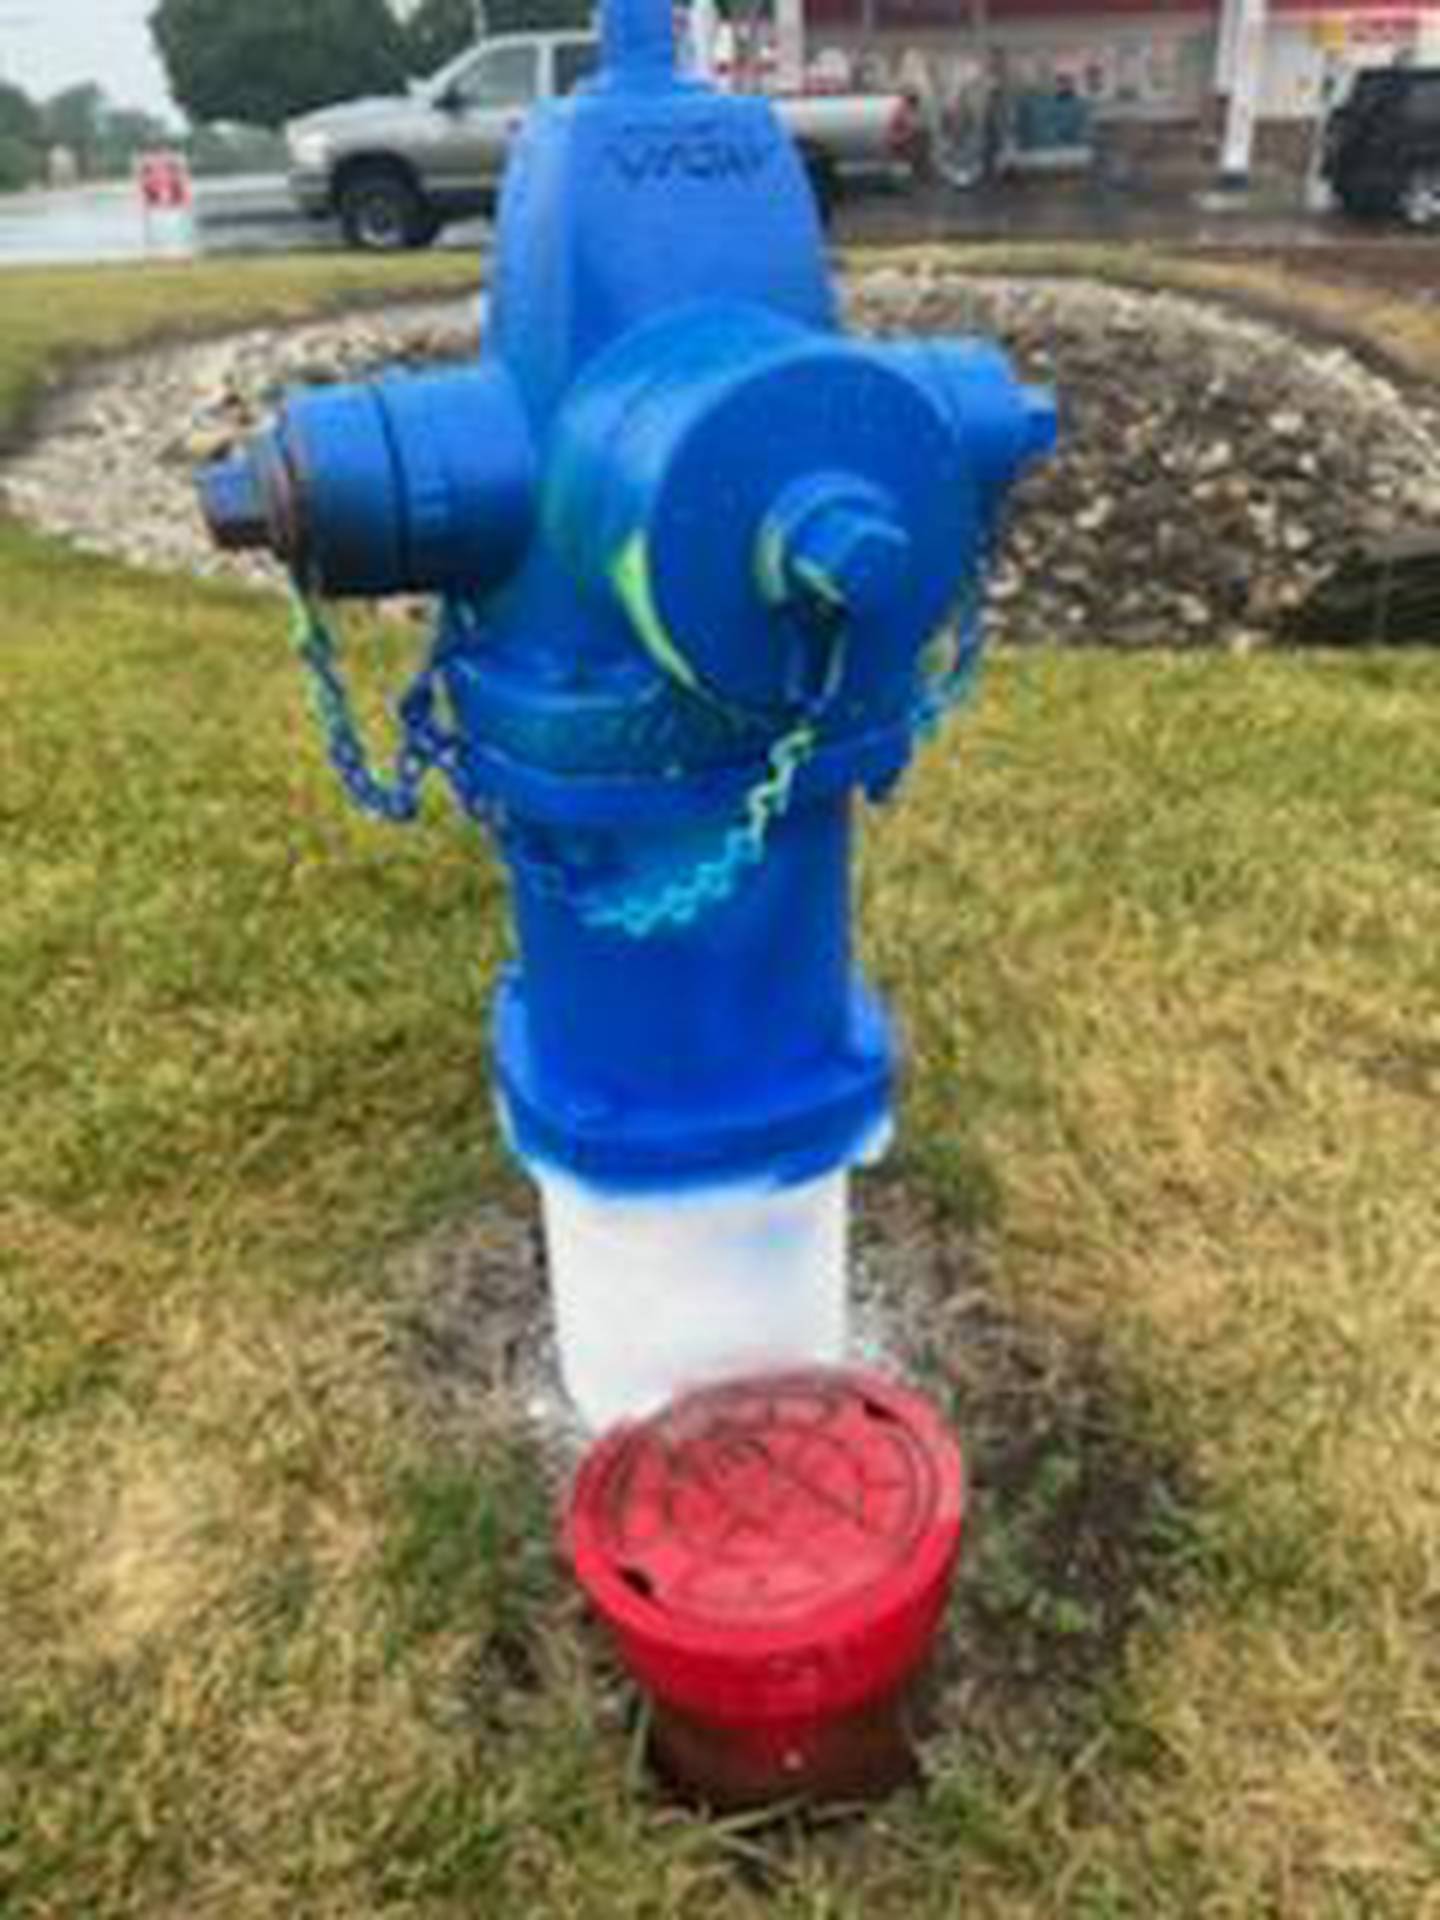 A week after her Rainbow Flag and Transgender Flag themed fire hydrant was doused with white paint on July 8, it was vandalized again July 15 with Viking blue, artist Chrissy Swanson said. She vowed to repaint it as soon as the rain stops.